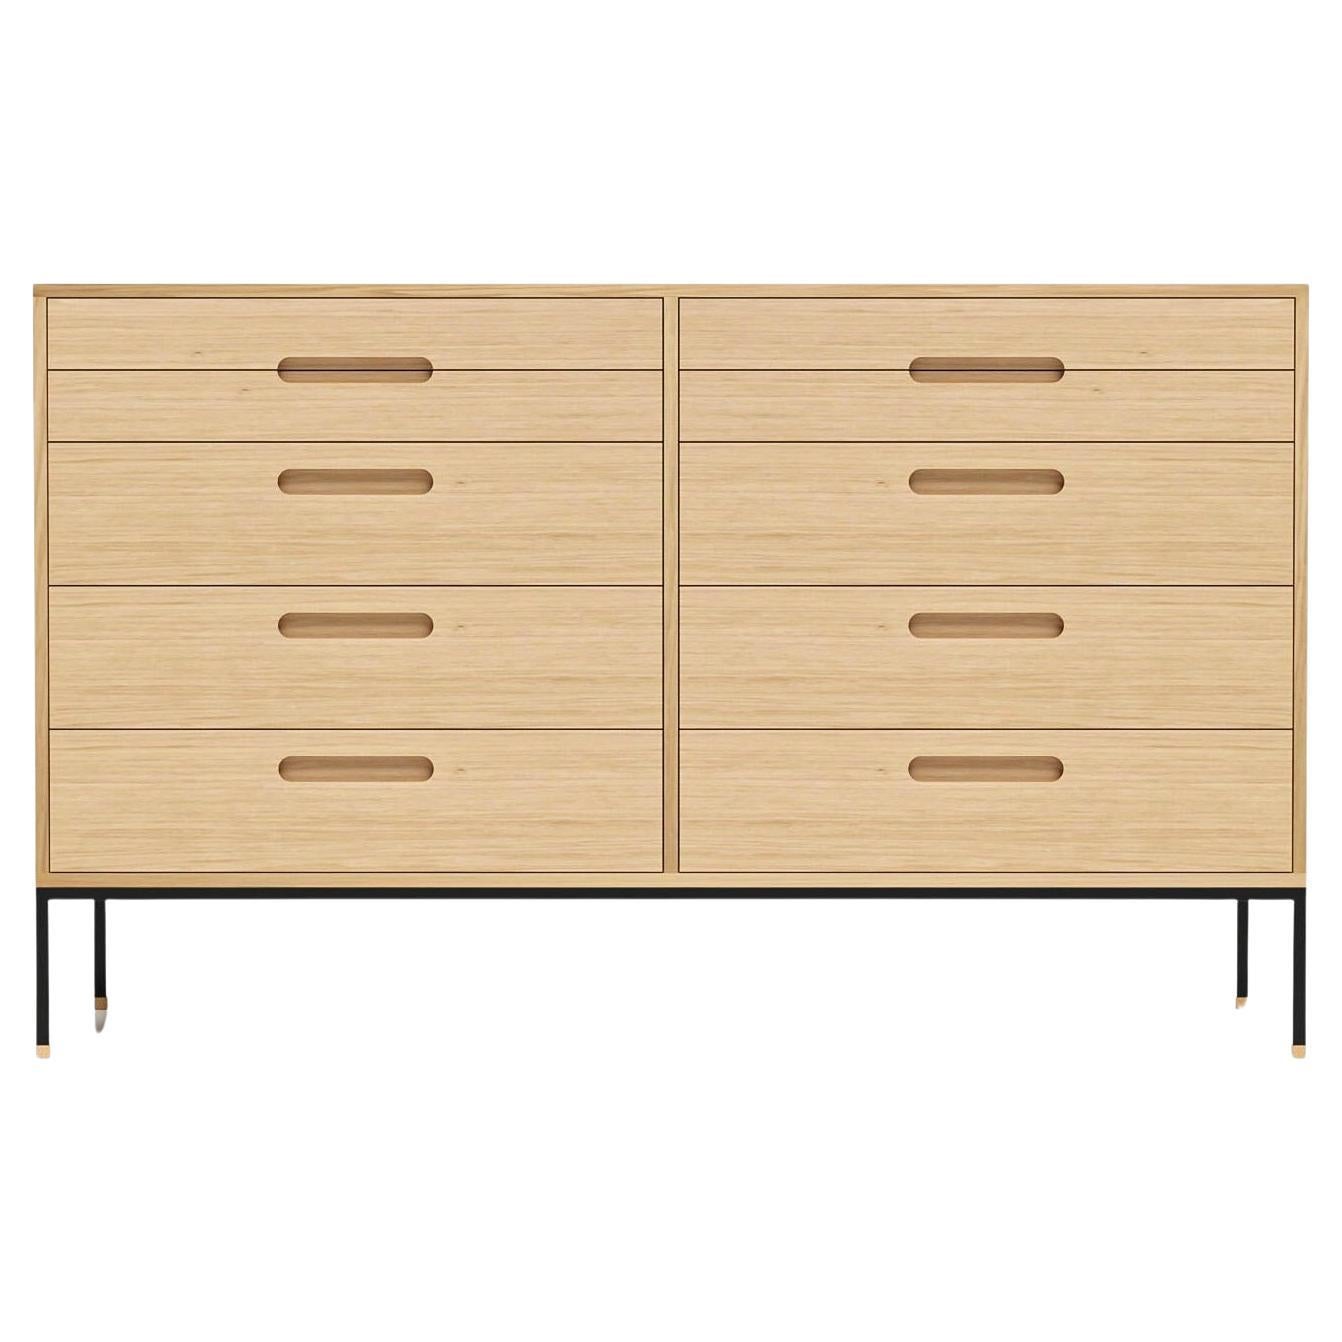 Chest of drawers model Cosmopol. 10 drawers